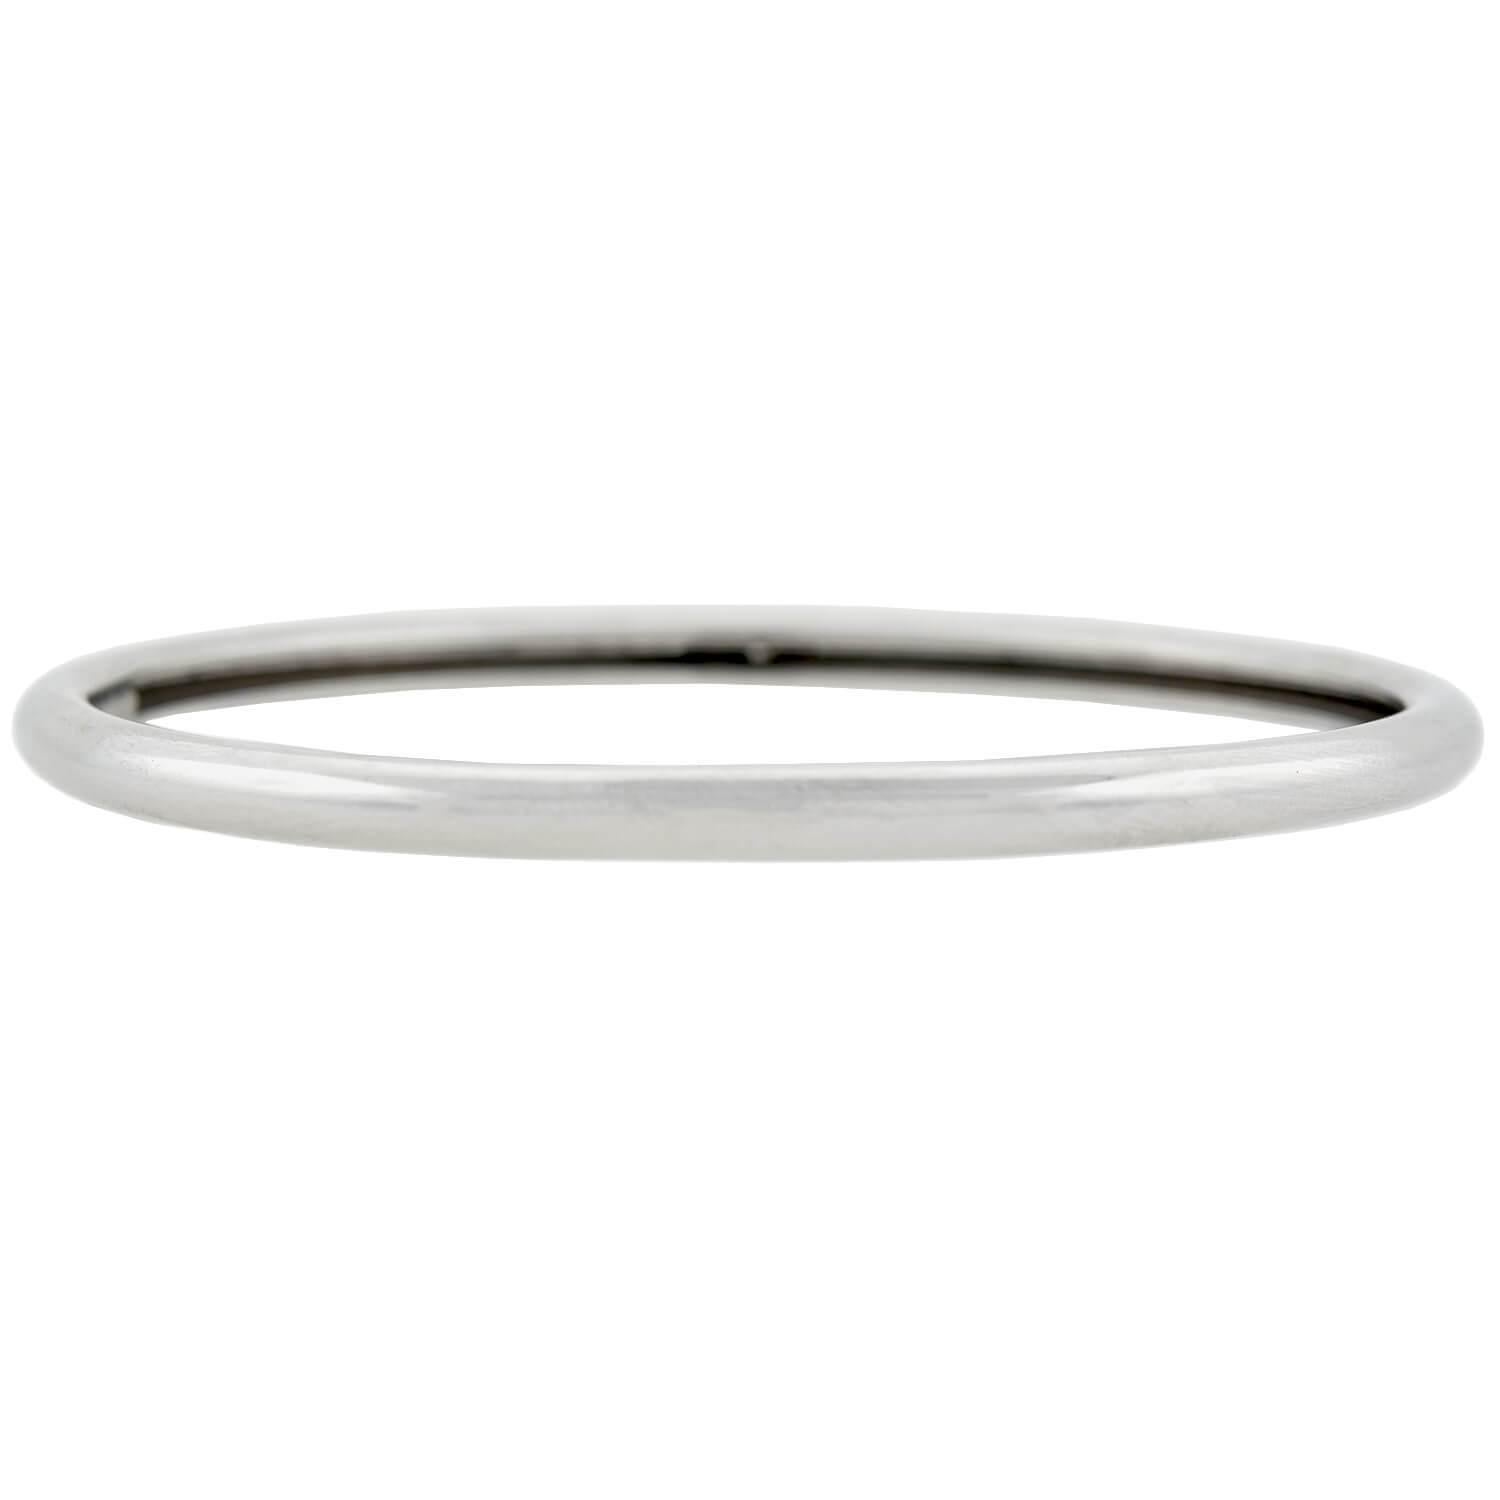 A fabulous Vintage (ca1993) bracelet by the legendary fashion house Tiffany & Co.! Crafted in 18kt white gold, this slip-on style bangle features a smoothly polished finish which carries along the entire surface, reflecting the light beautifully